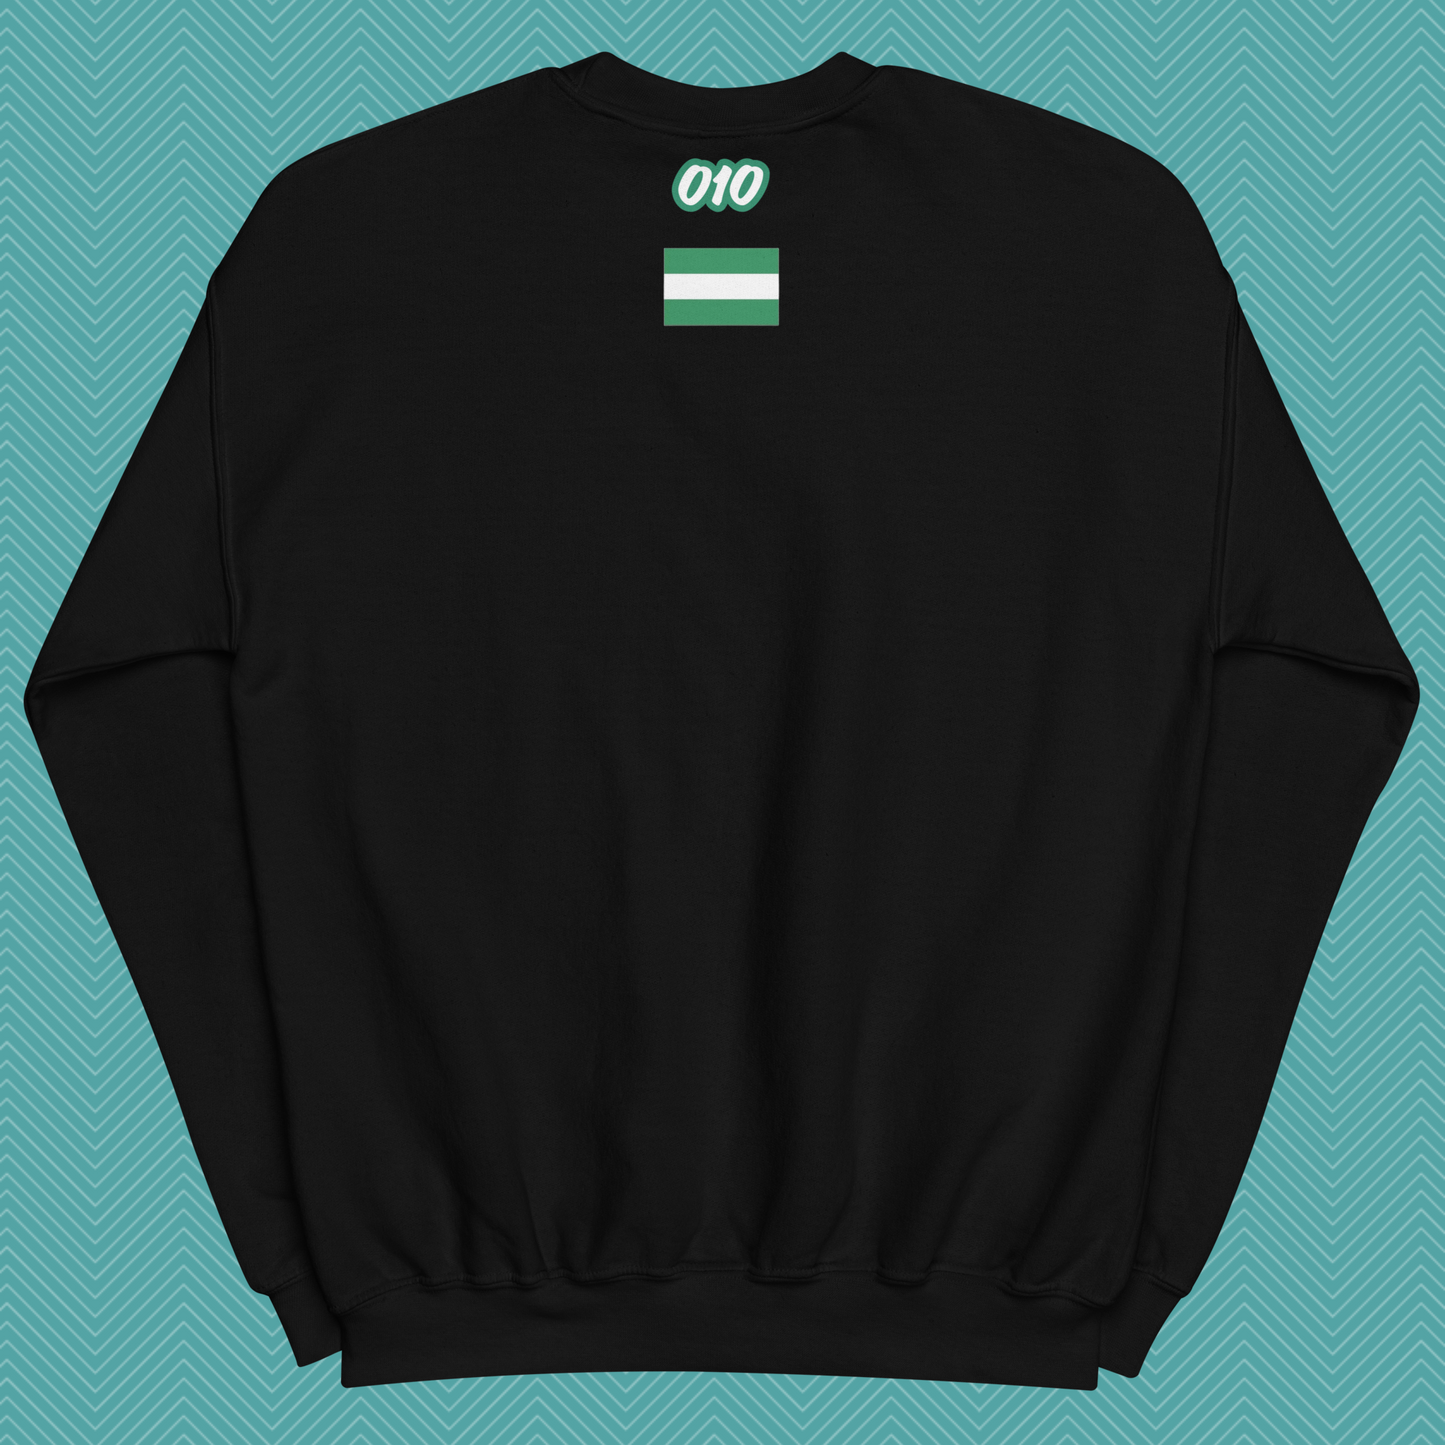 010 isn't just a code Sweater